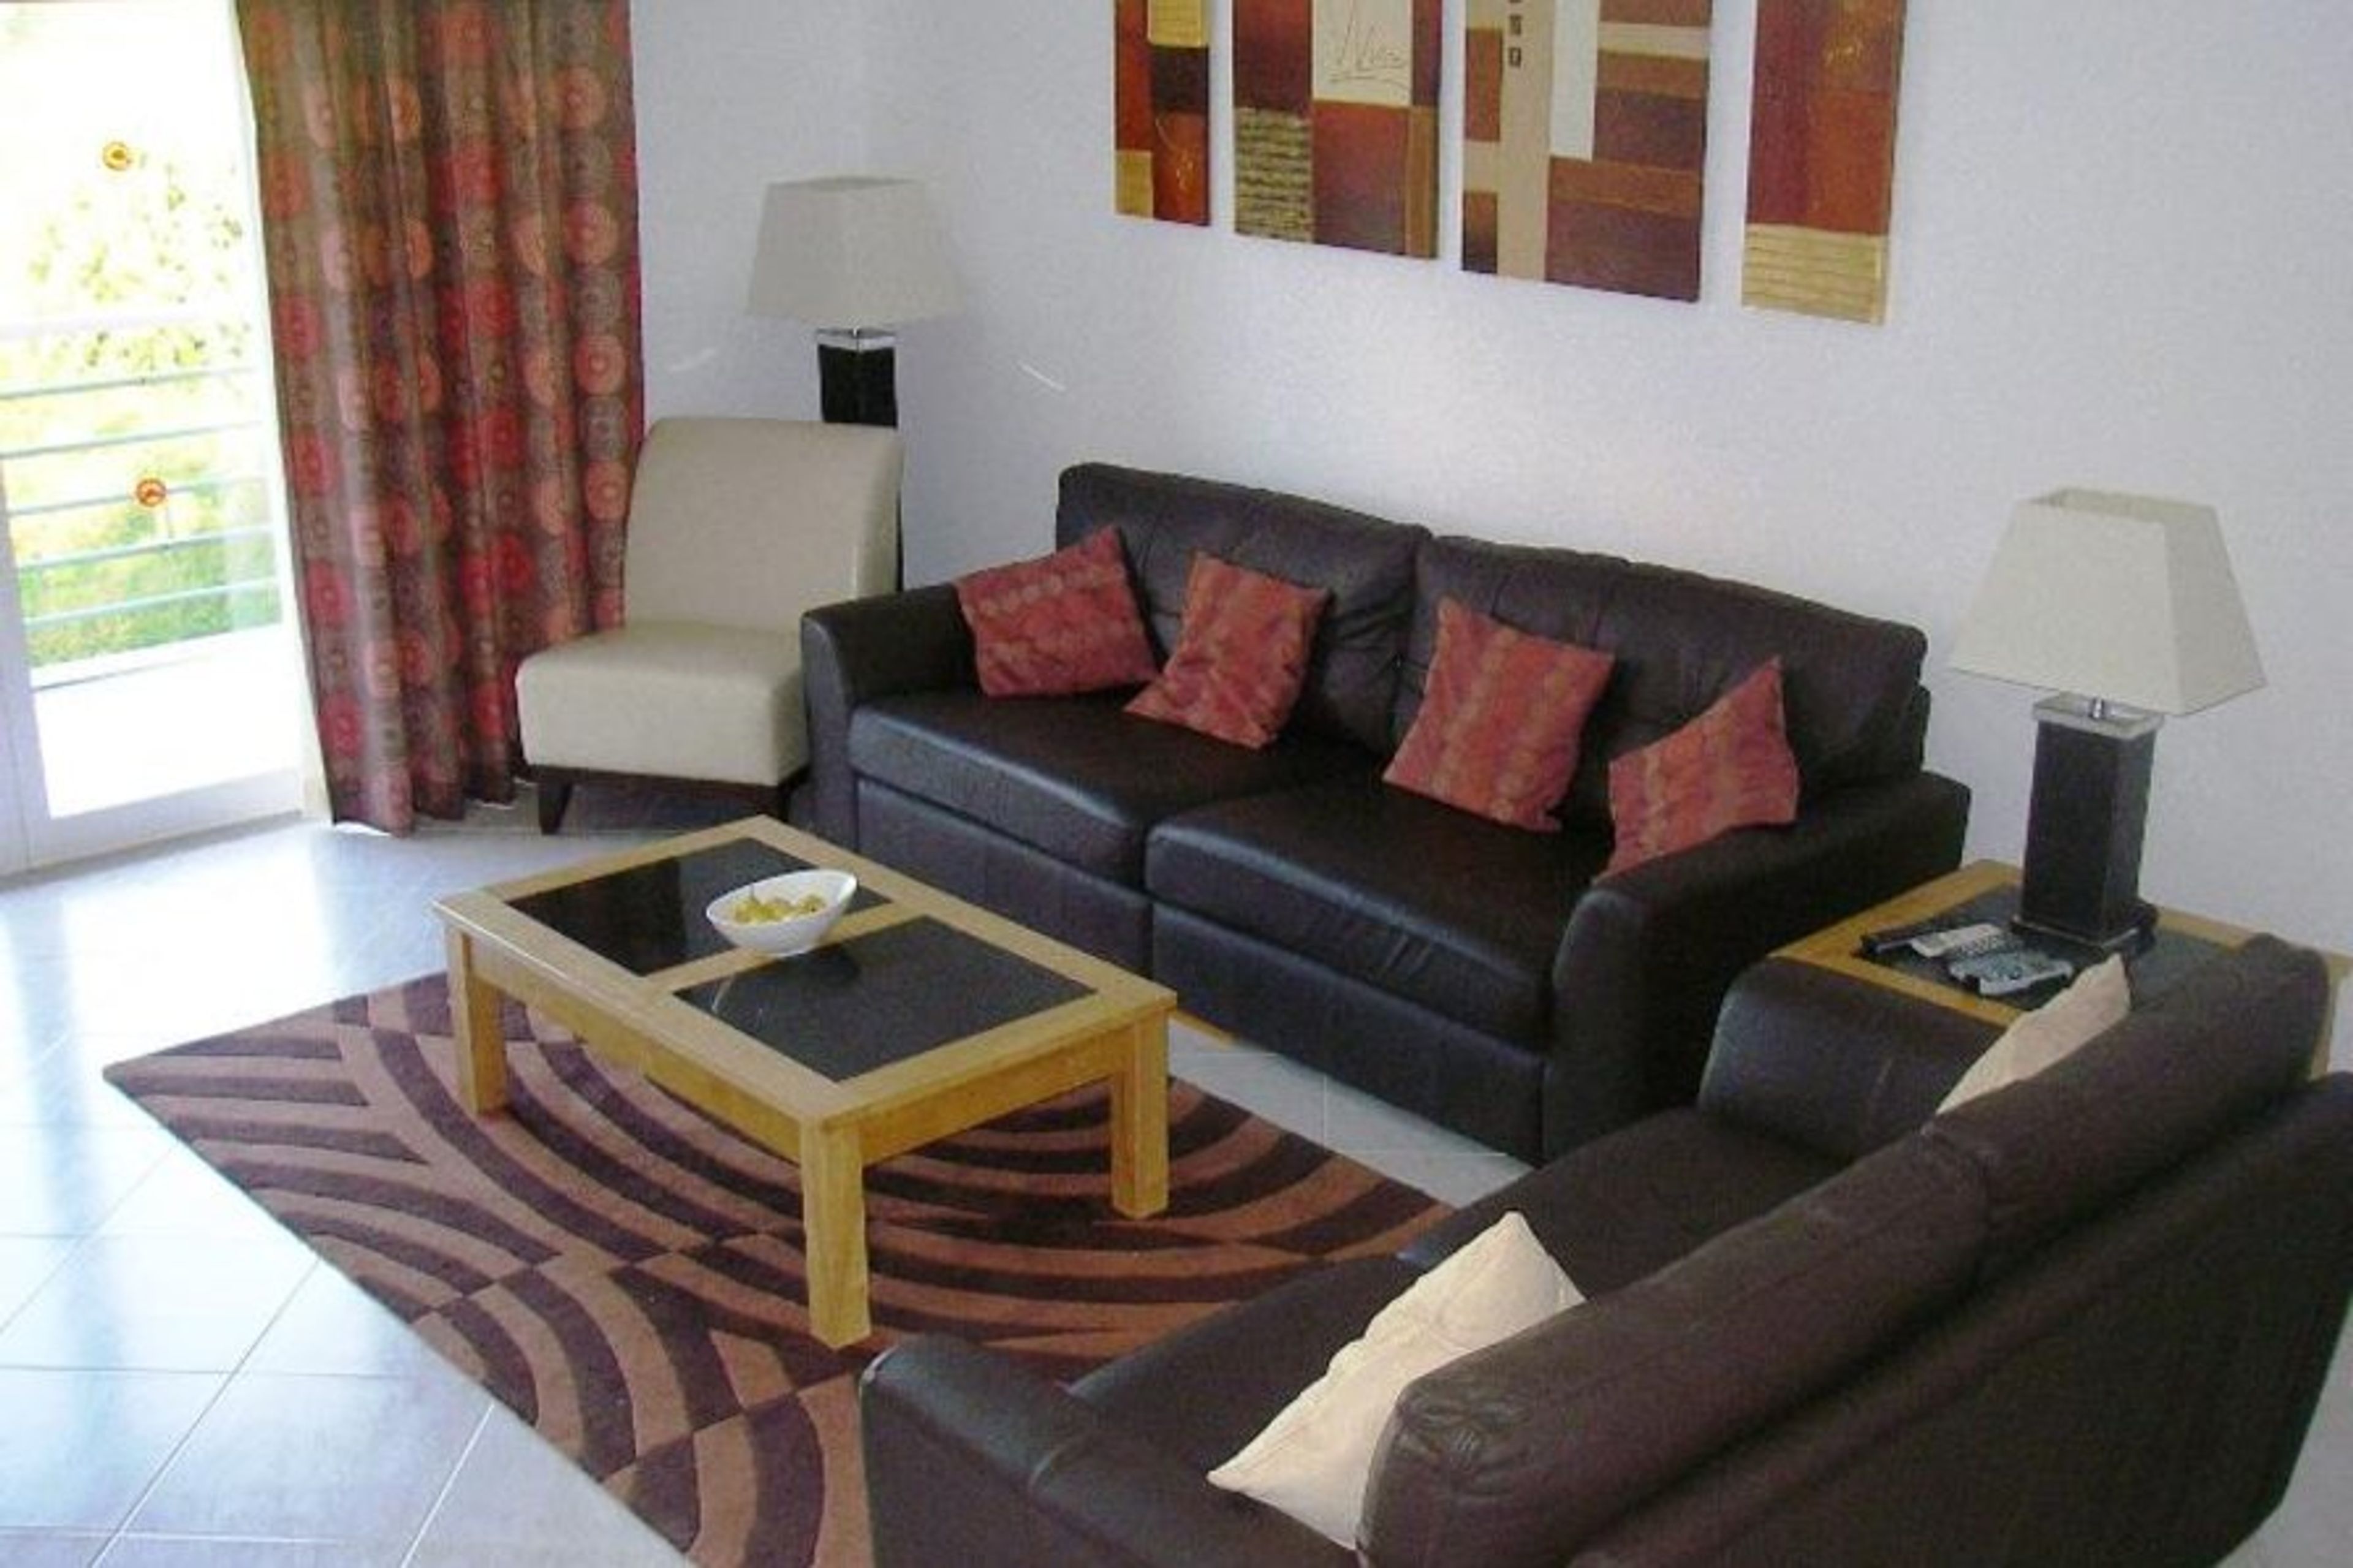 Spacious & Comfortable Lounge with Sumptuous leather sofas